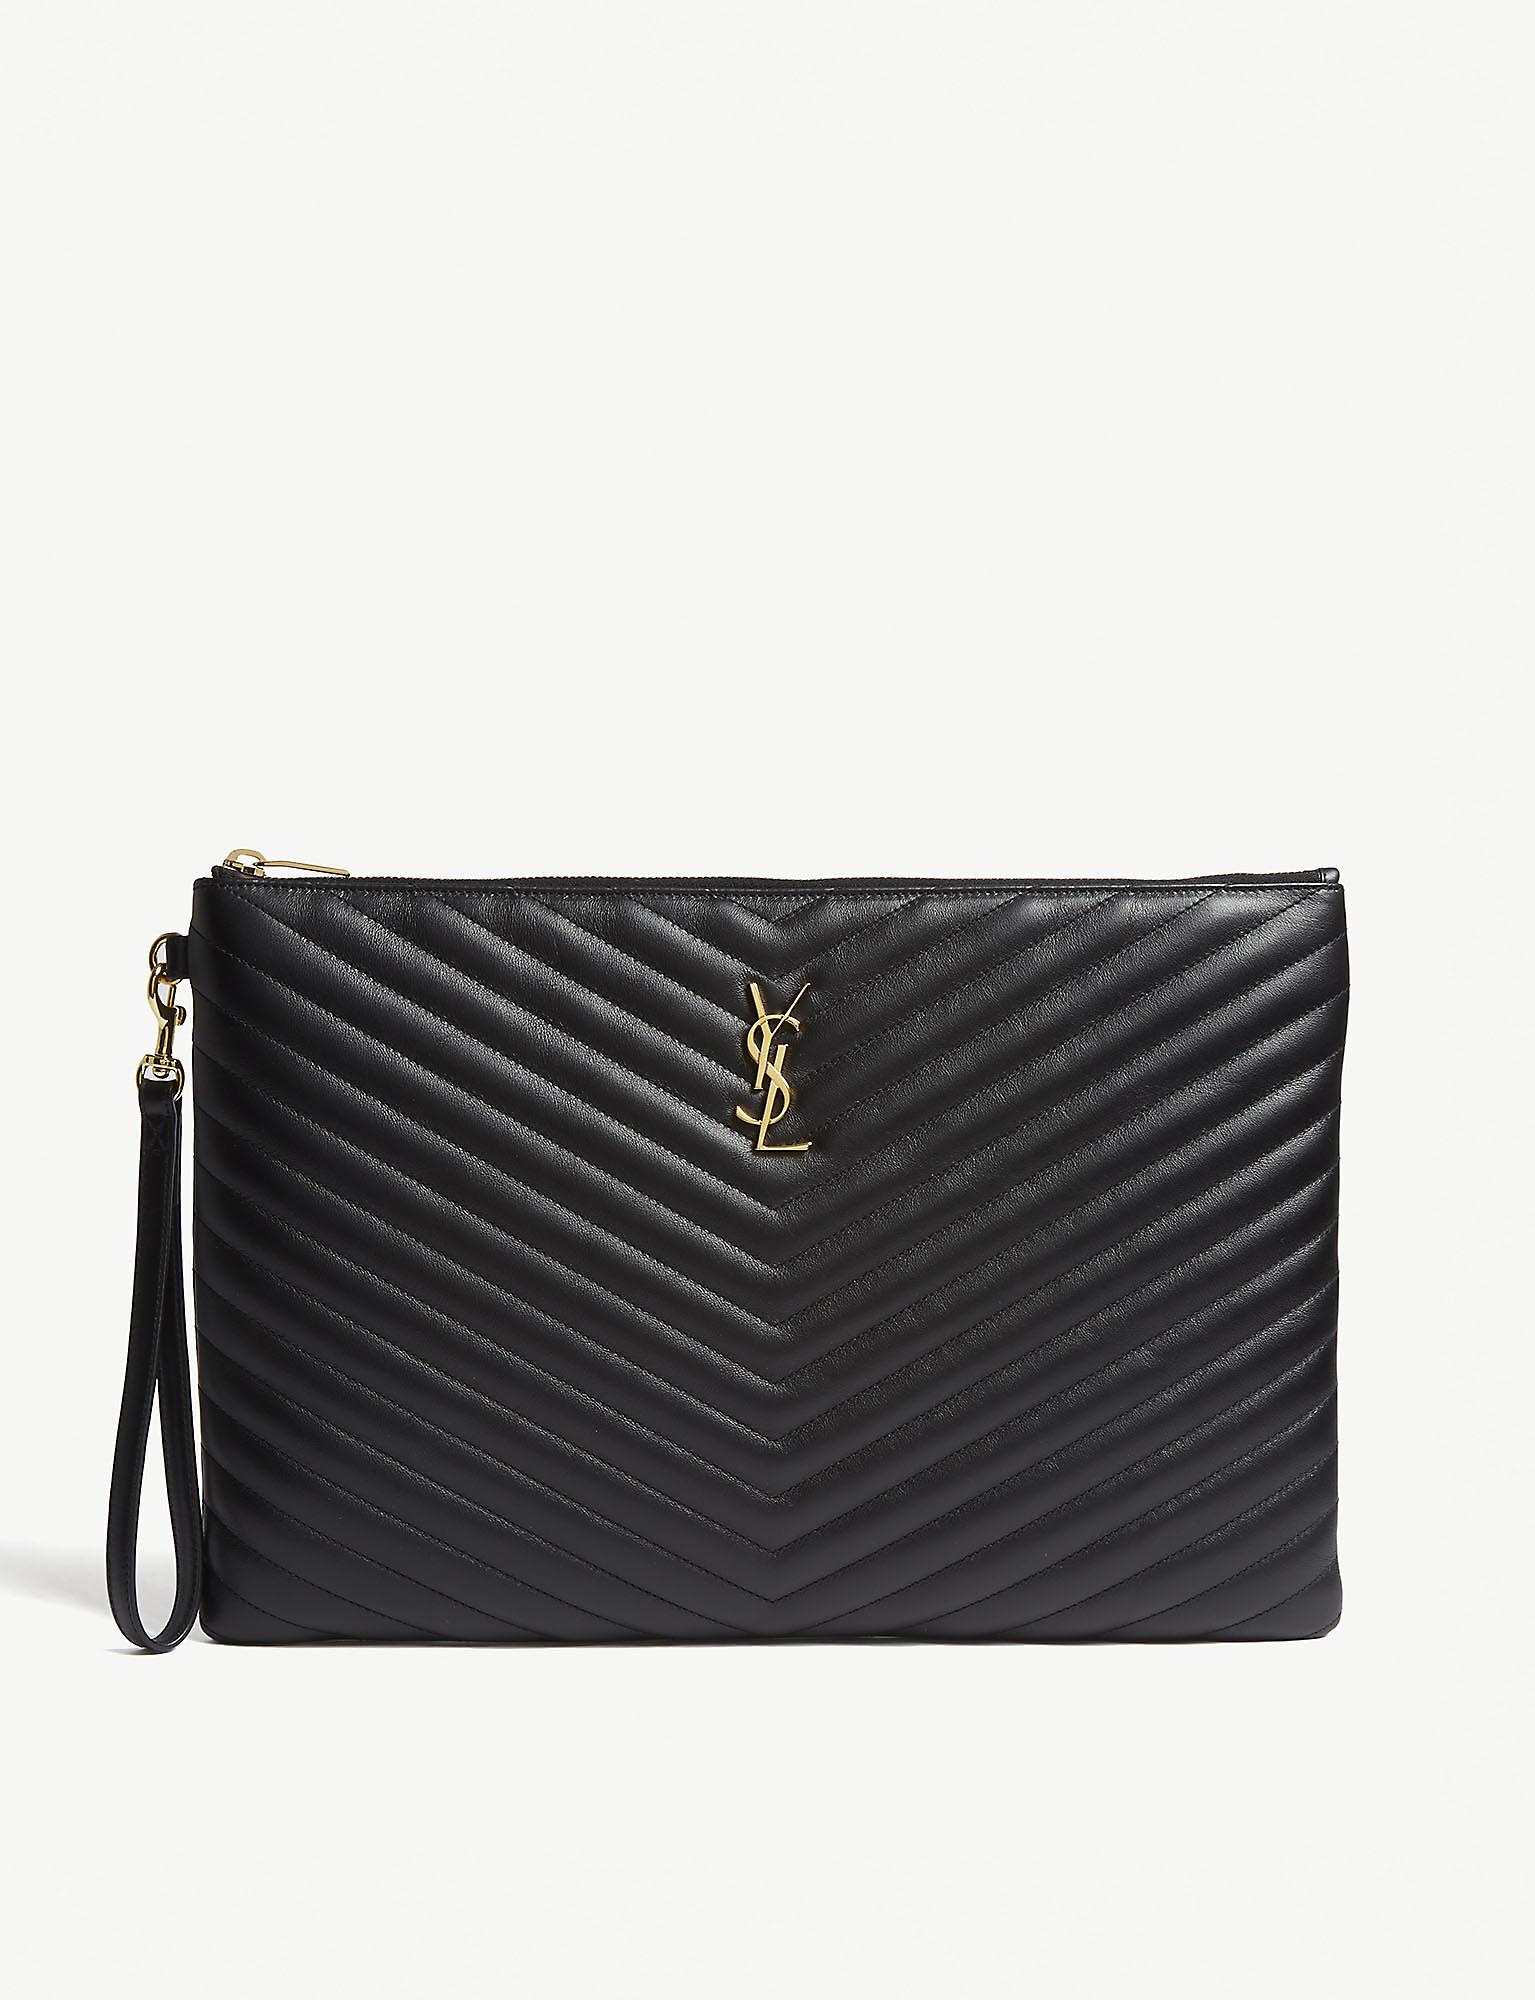 Saint Laurent Monogram Quilted Leather Pouch in Black - Lyst